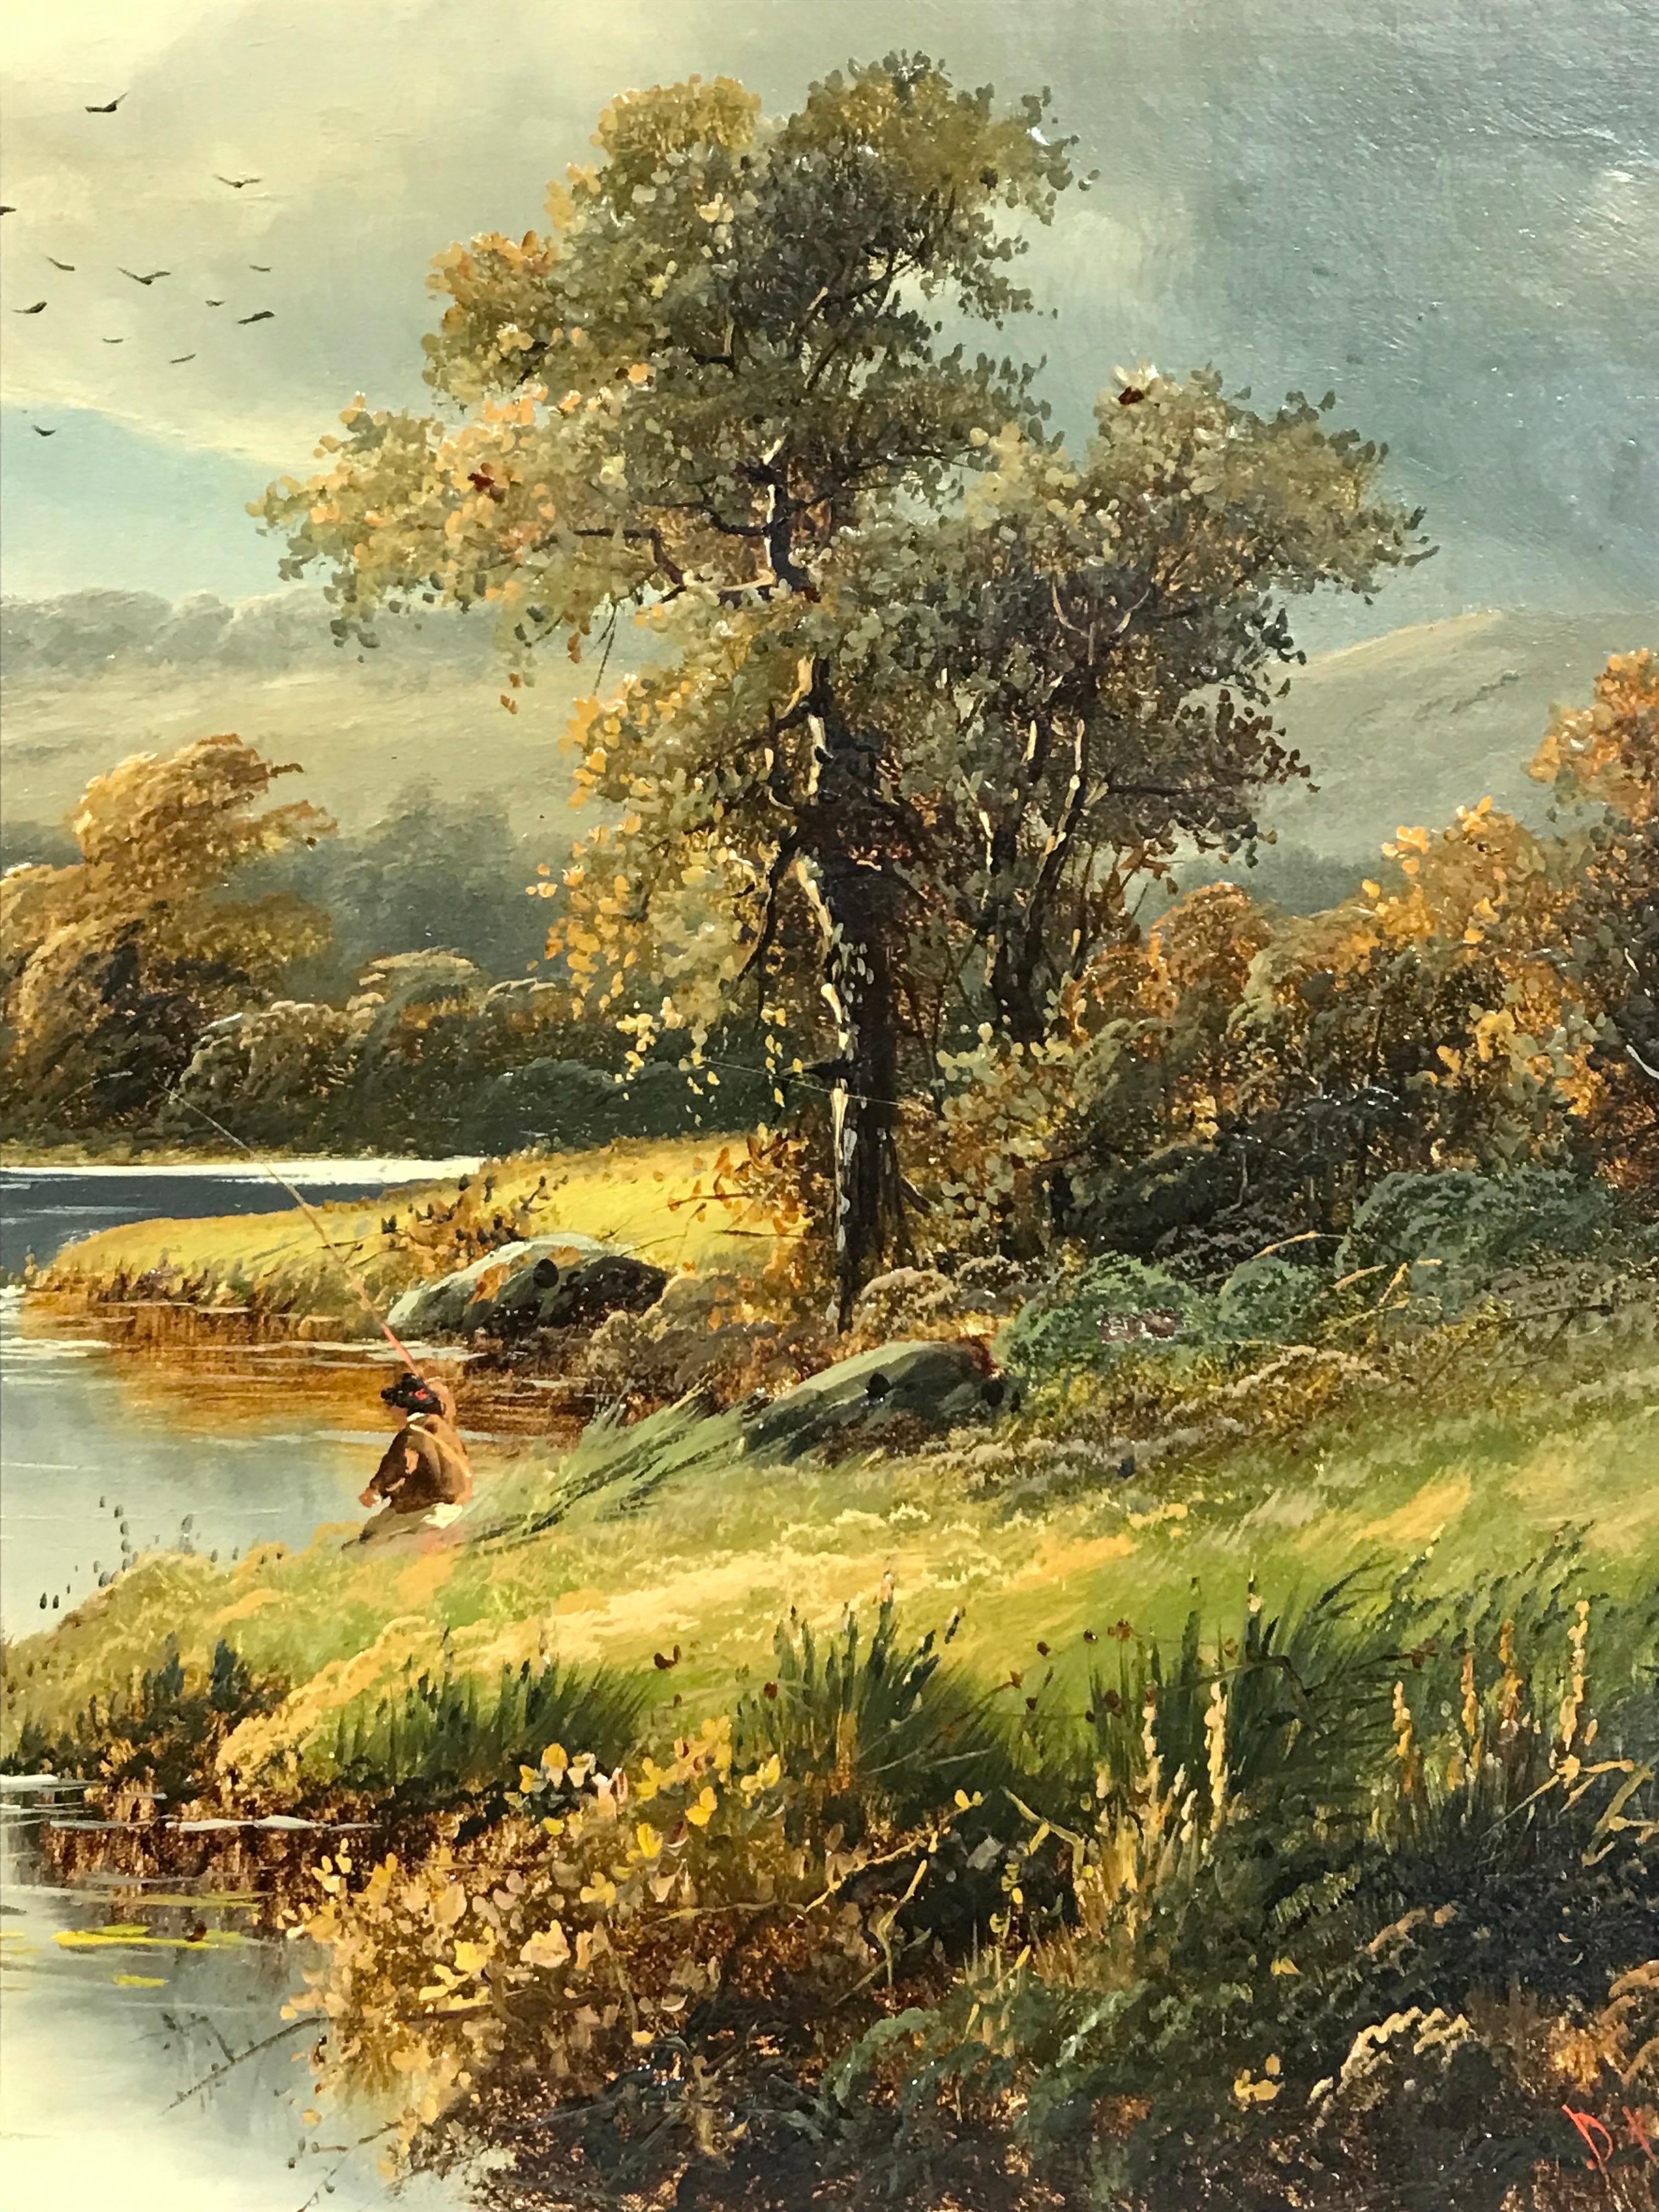 Artist/ School: Scottish School, 19th century, indistinctly signed lower corner

Title: The Angler in the Scottish Highlands, beautiful landscape scene.

Medium: oil painting on canvas, unframed, signed

canvas: 16 x 26 inches

Provenance: private